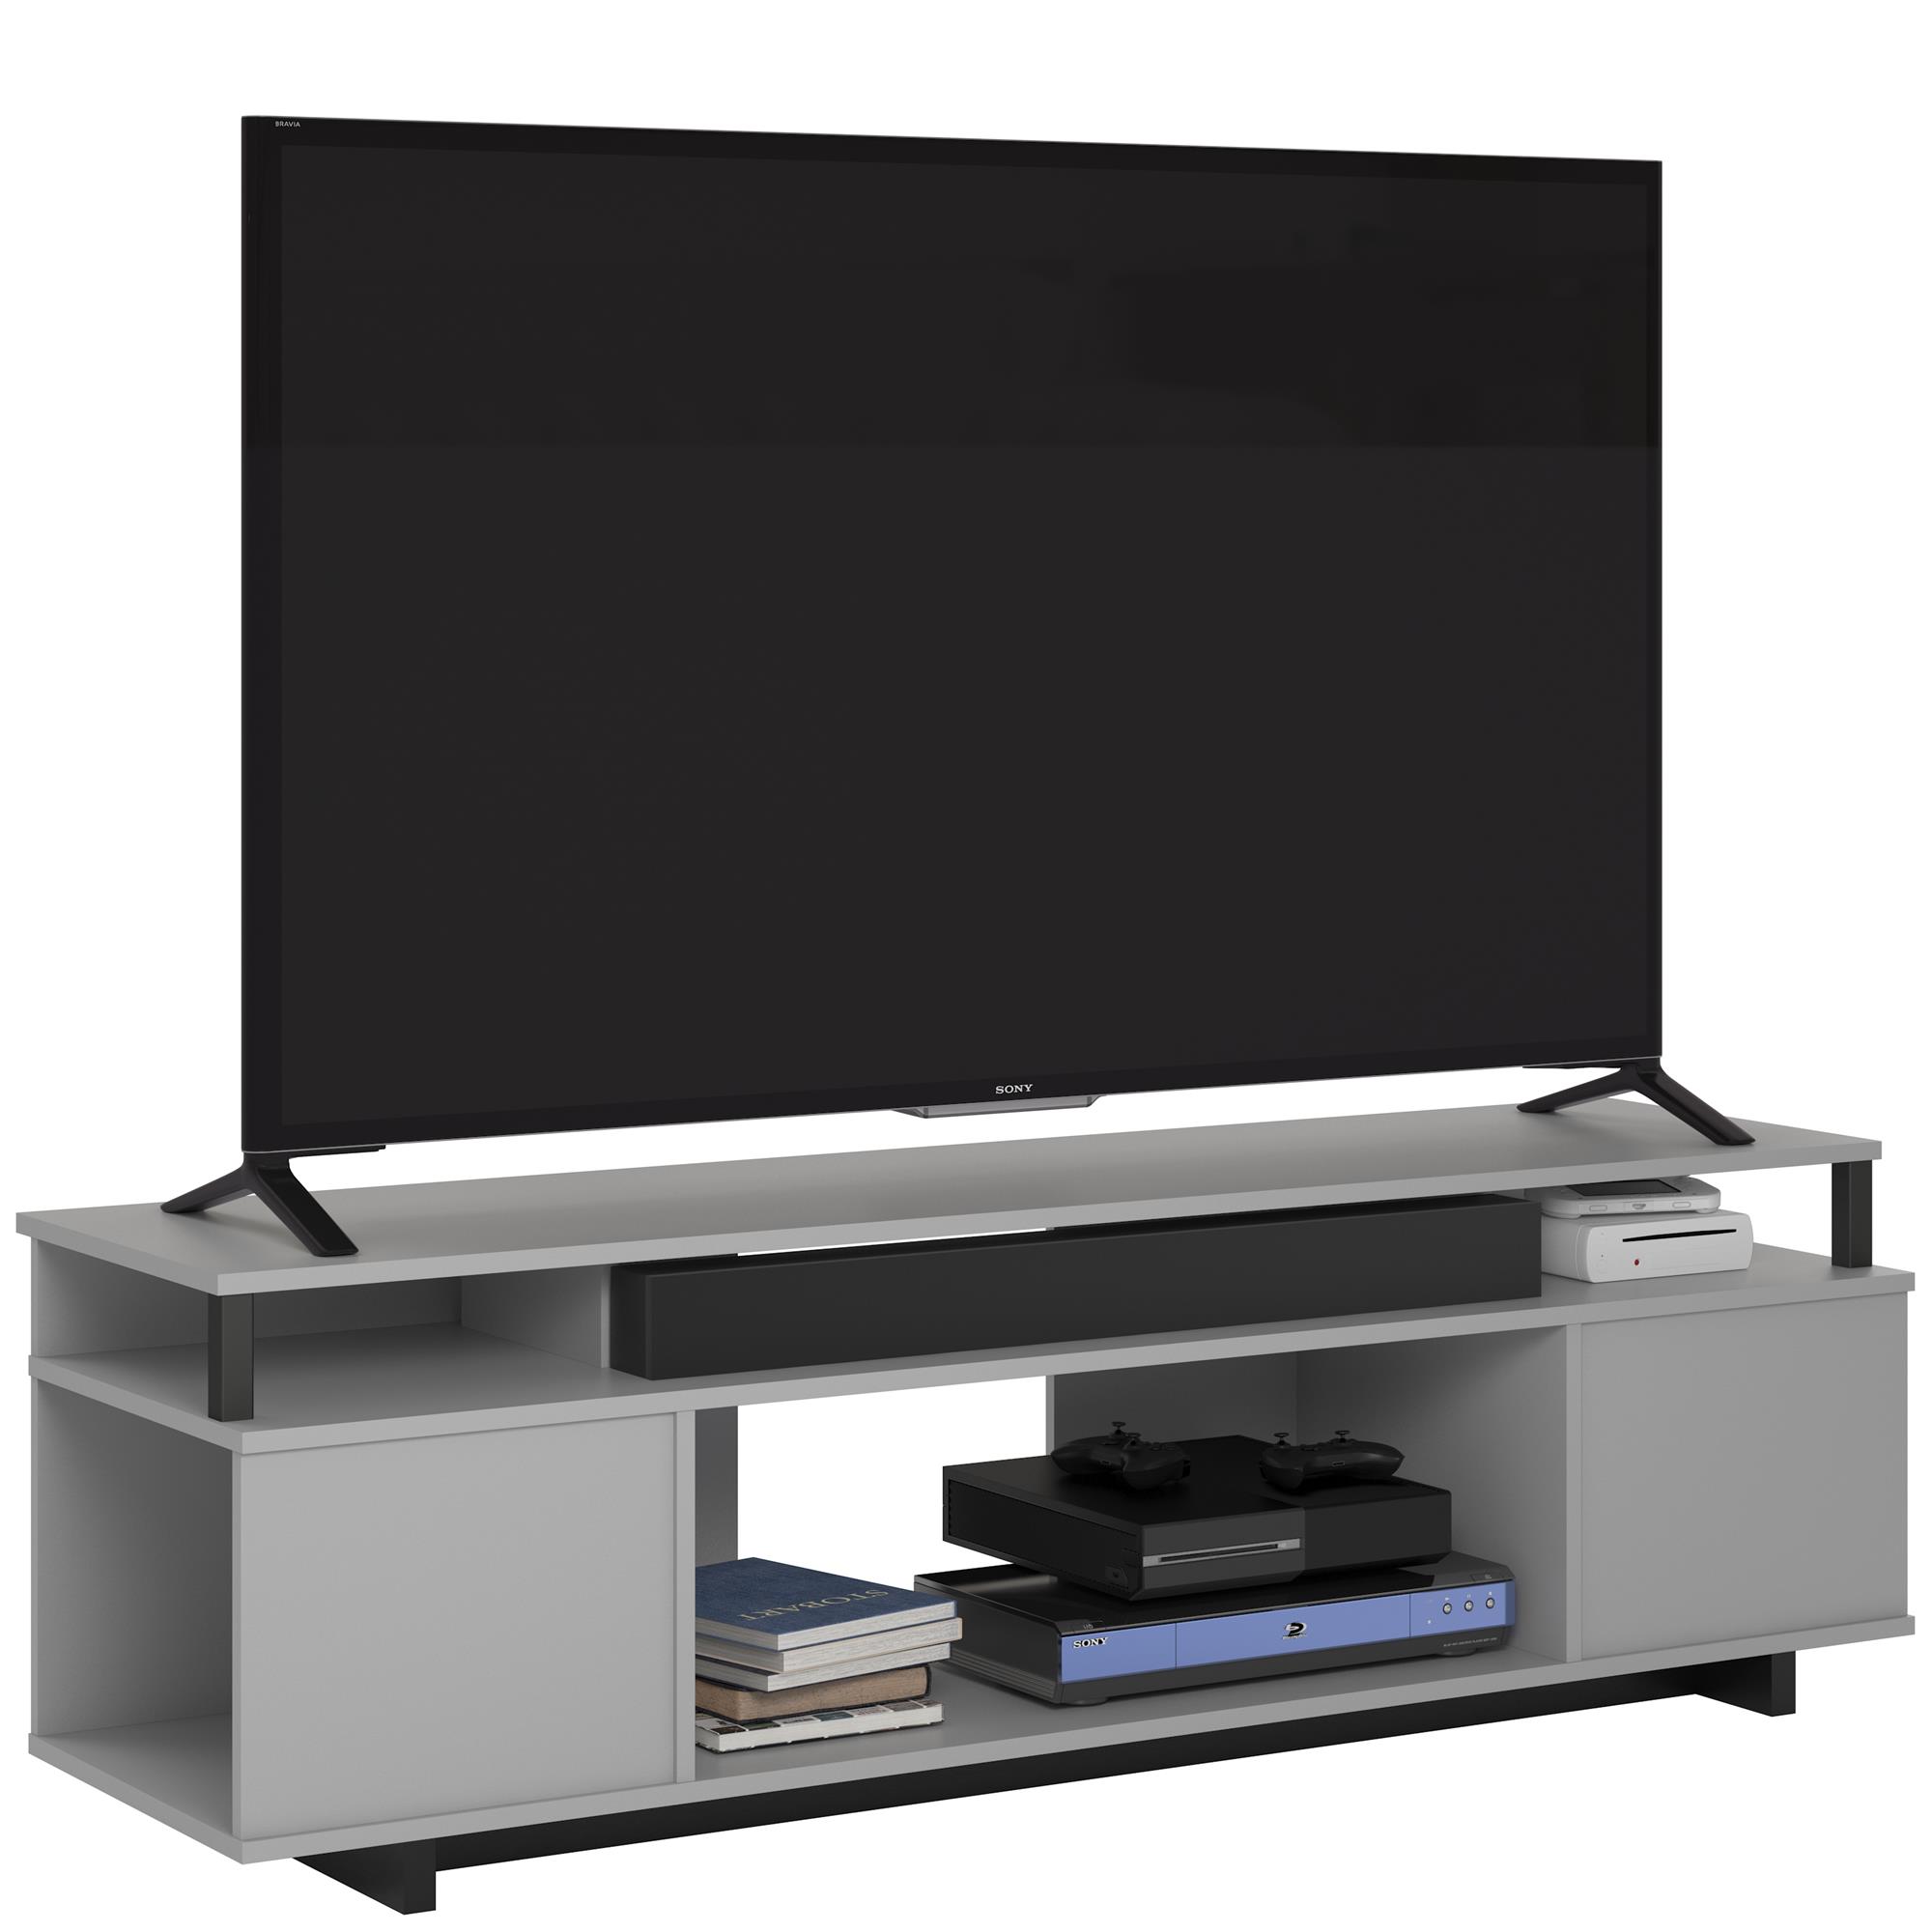 Ameriwood Home Kensington Place TV Stand for TVs up to 65", Dove Gray - image 3 of 5